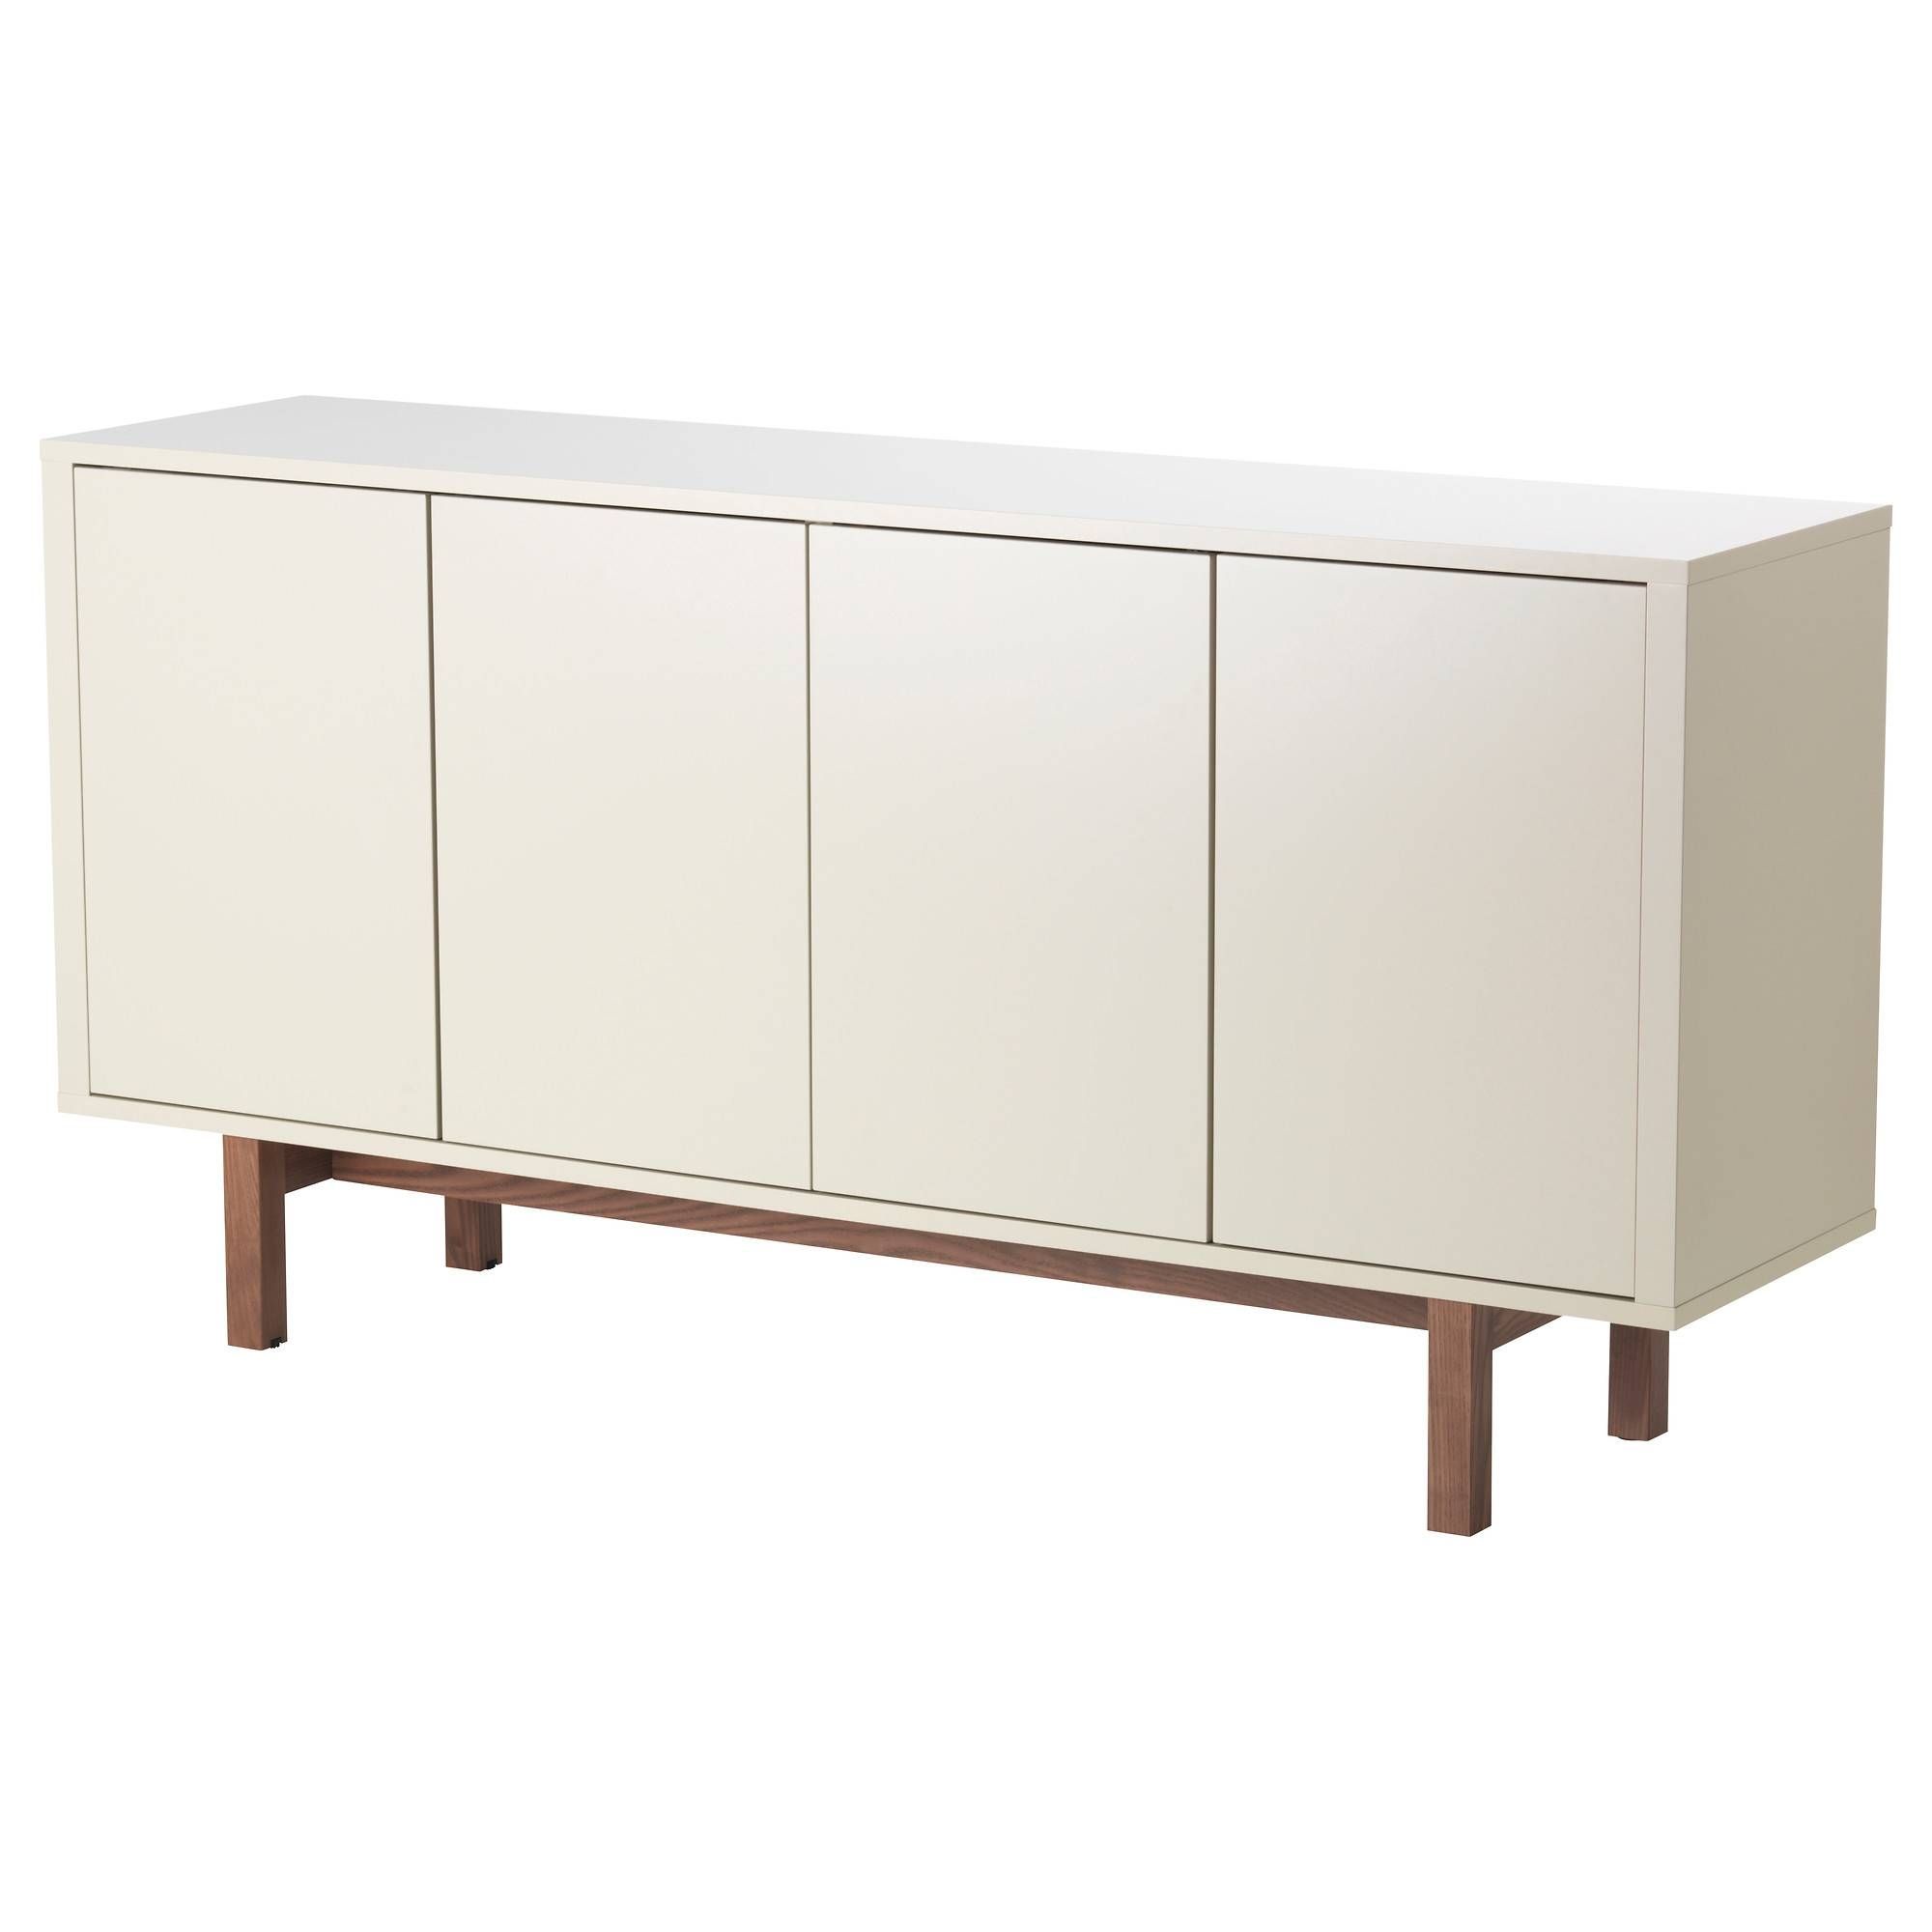 Dining Room: Elegant White Ikea Sideboard For Modern Family Room With Regard To 2017 White Gloss Ikea Sideboards (View 14 of 15)